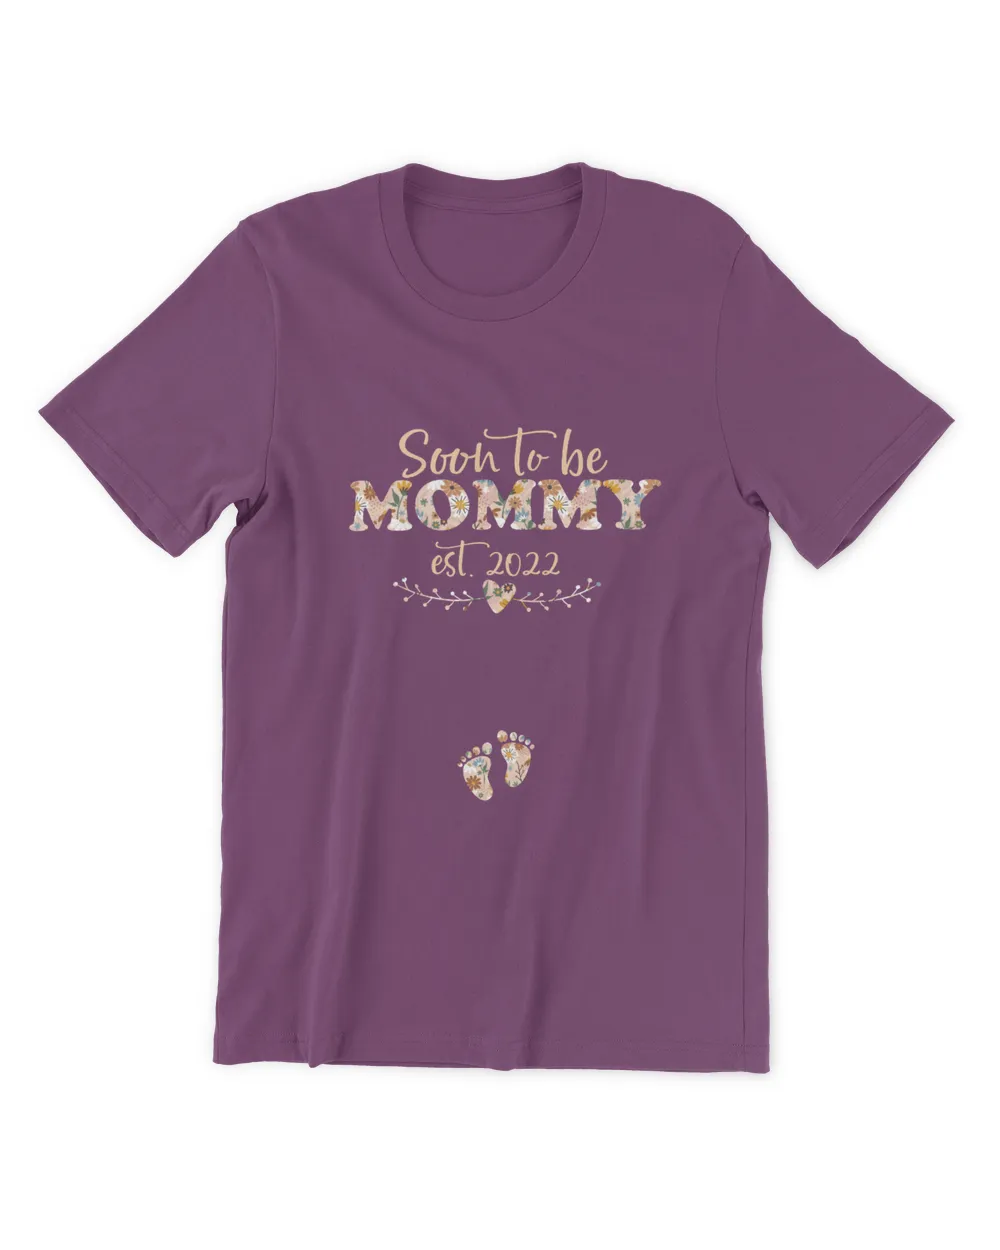 RD Promoted to Mommy Est 2022, Soon To Be Mommy Est 2022 Shirt, Baby Announcement, Pregnancy Announcement Shirt, Mommy To Be Shirt, Mom Shirt